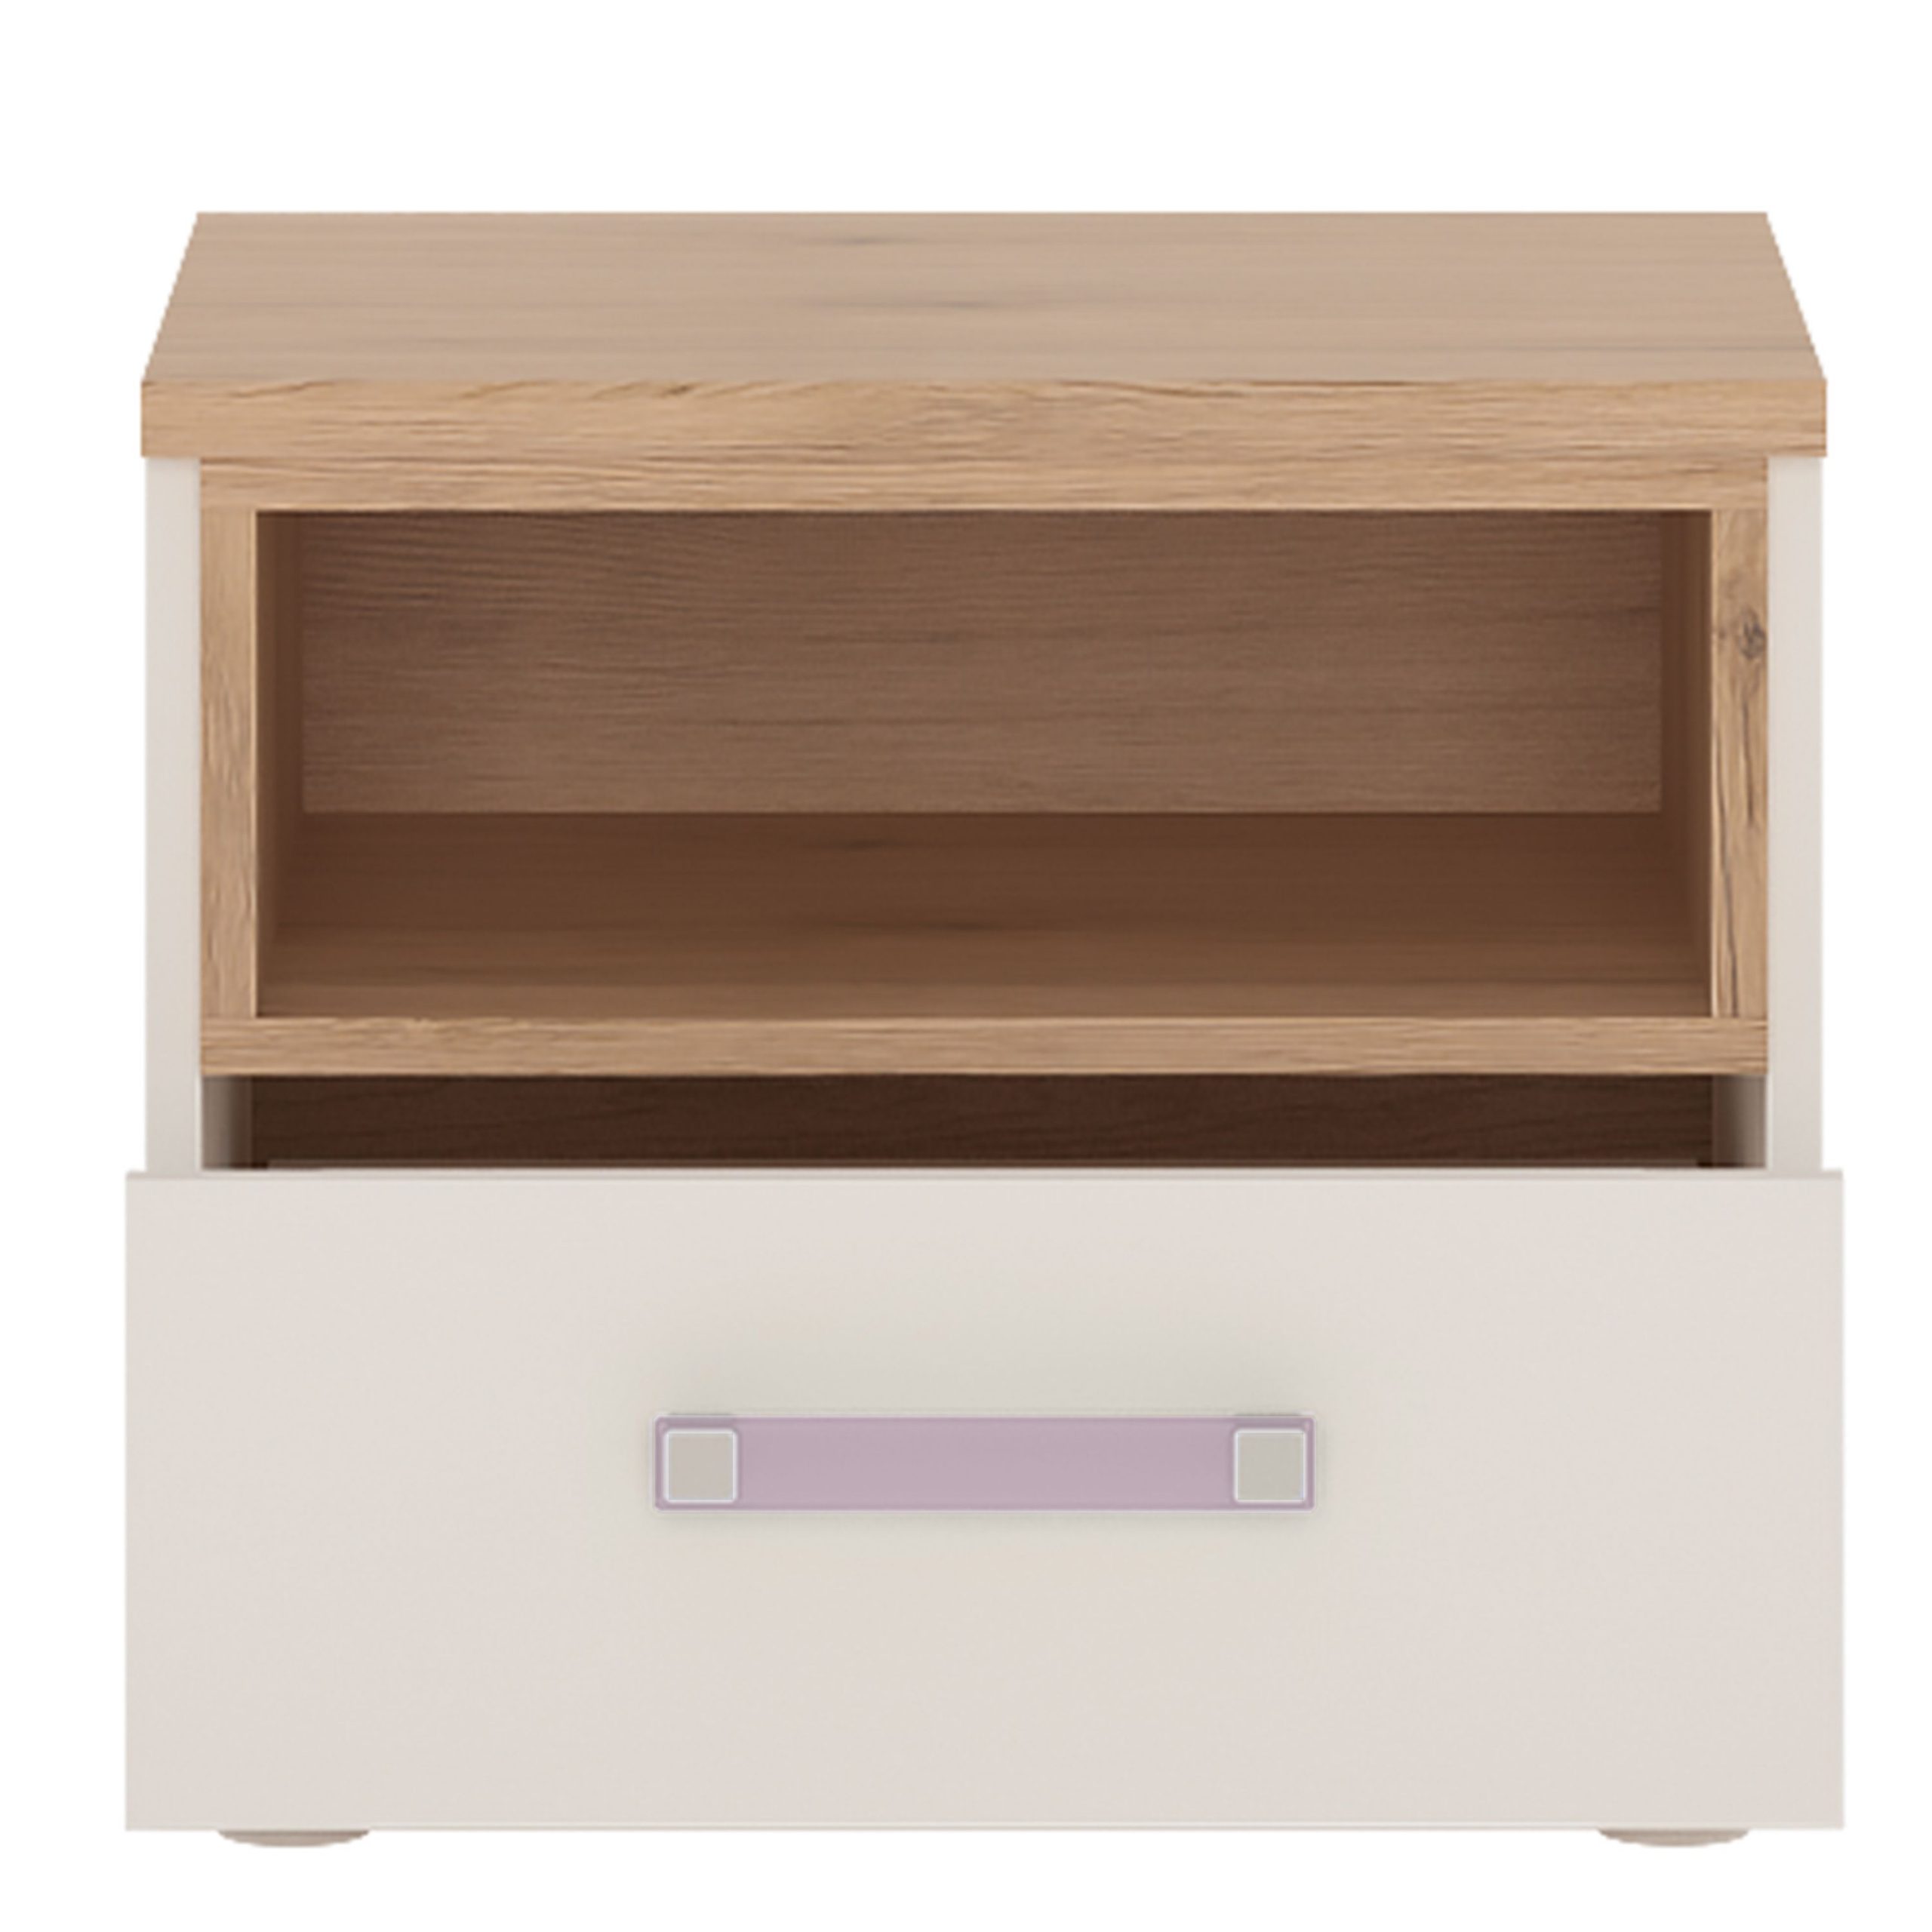 4Kids 1 Drawer Bedside Cabinet In Light Oak And White High Gloss (lilac Handles)